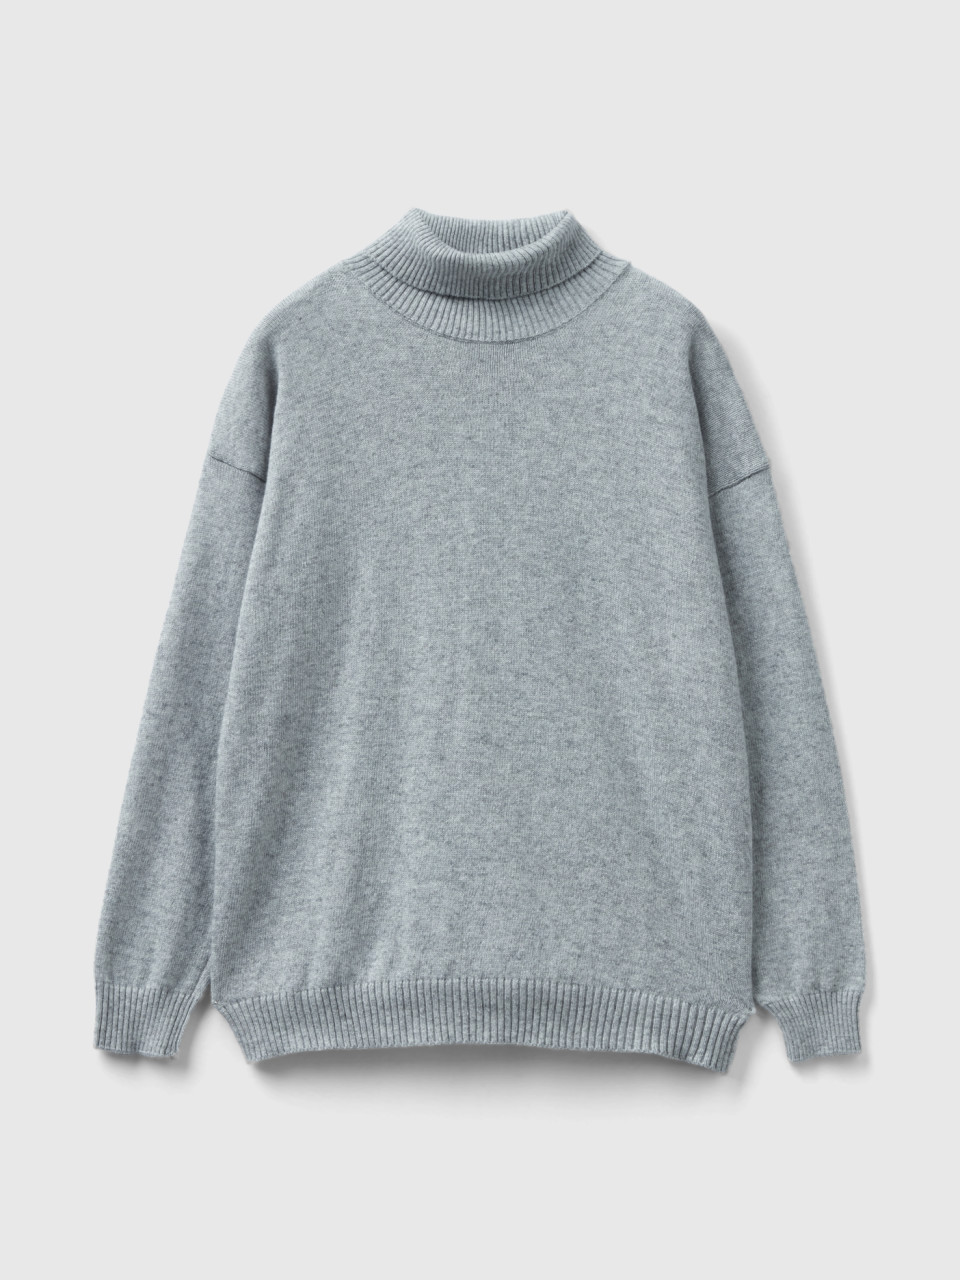 Benetton, Turtleneck Sweater In Cashmere And Wool Blend, Gray, Kids